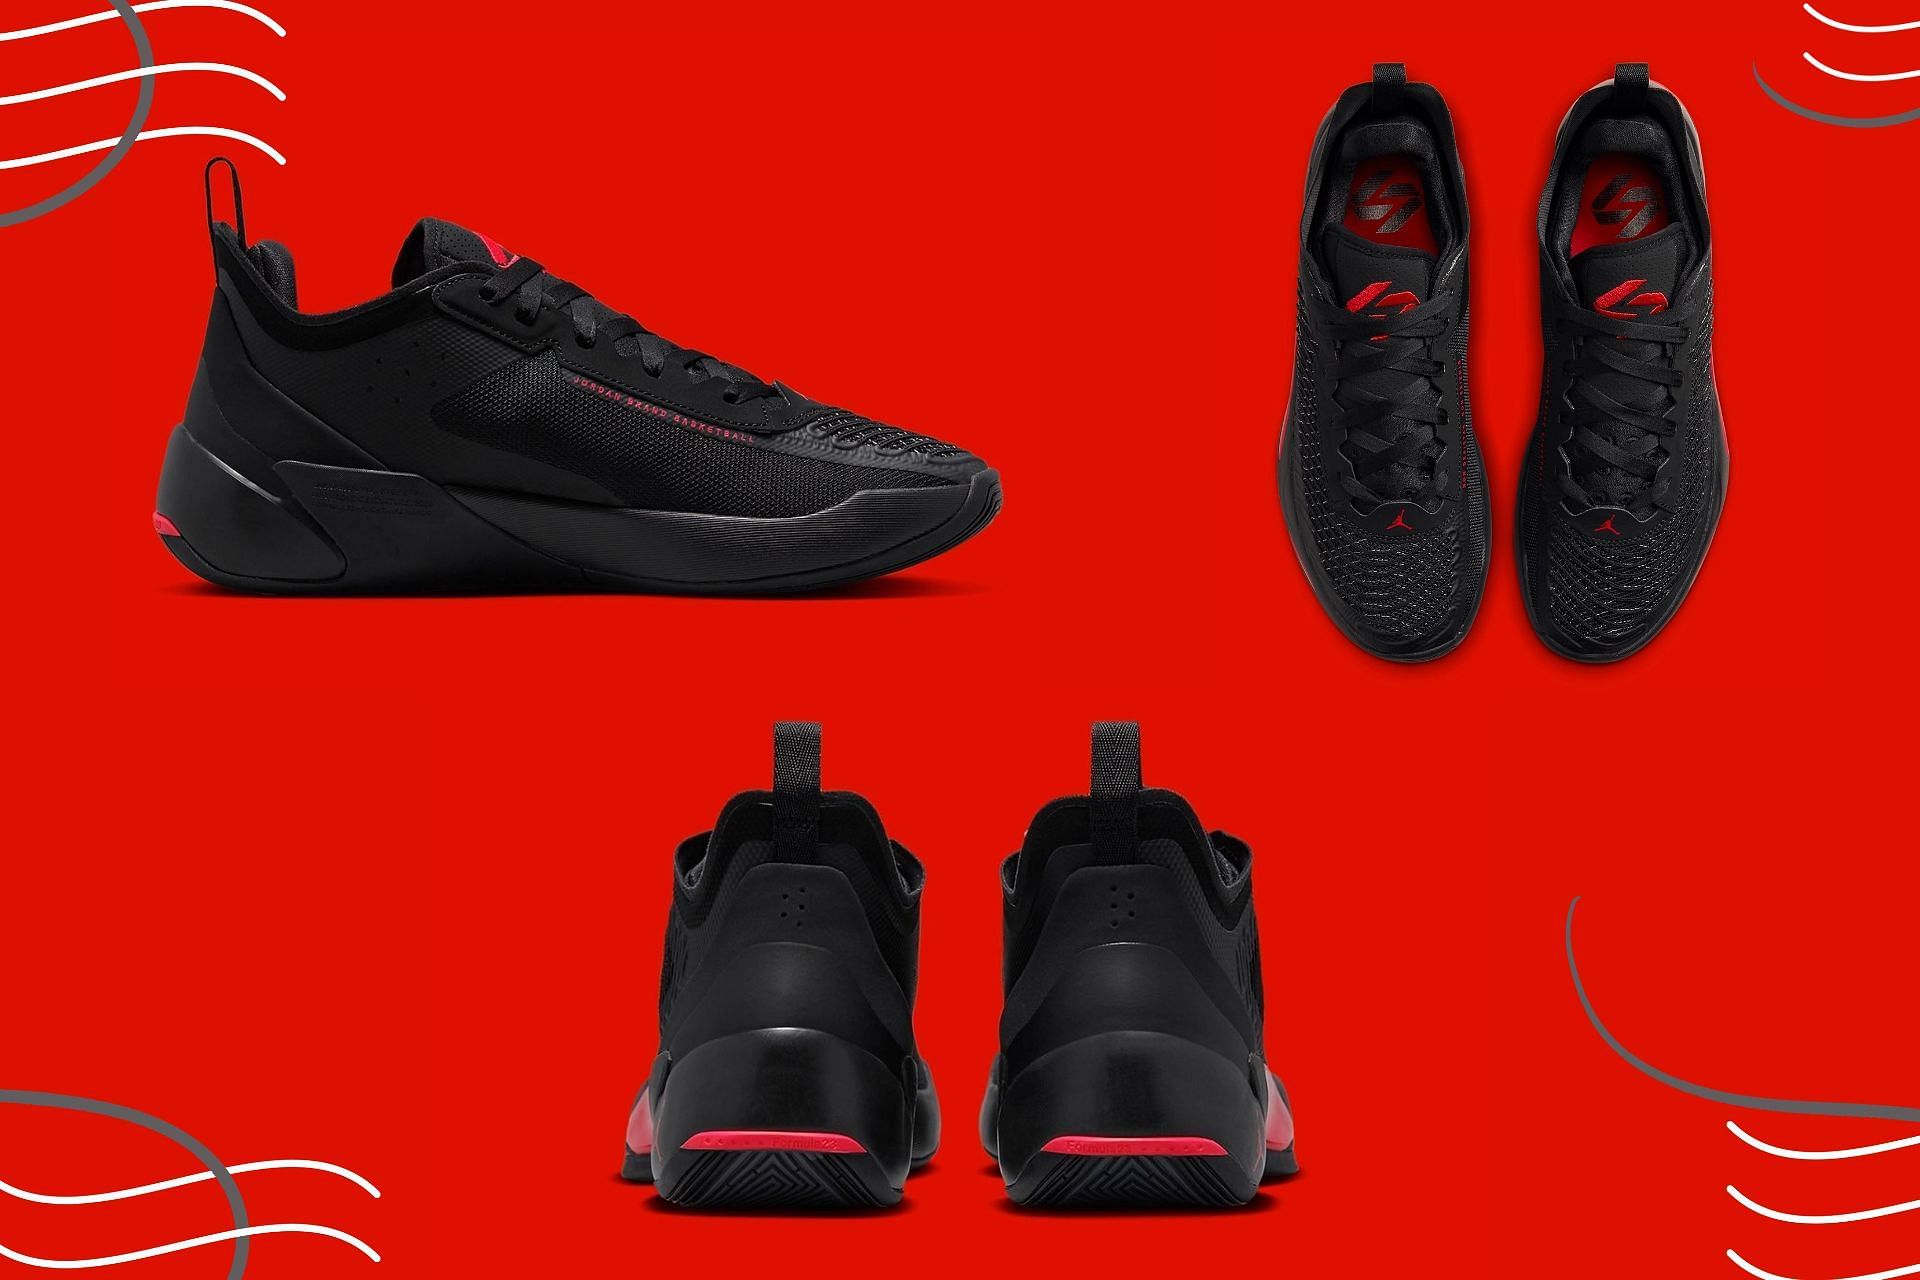 Where nike nadal tennis shoes to buy Jordan Luka 1 "Bred" shoes? Price, release date, and